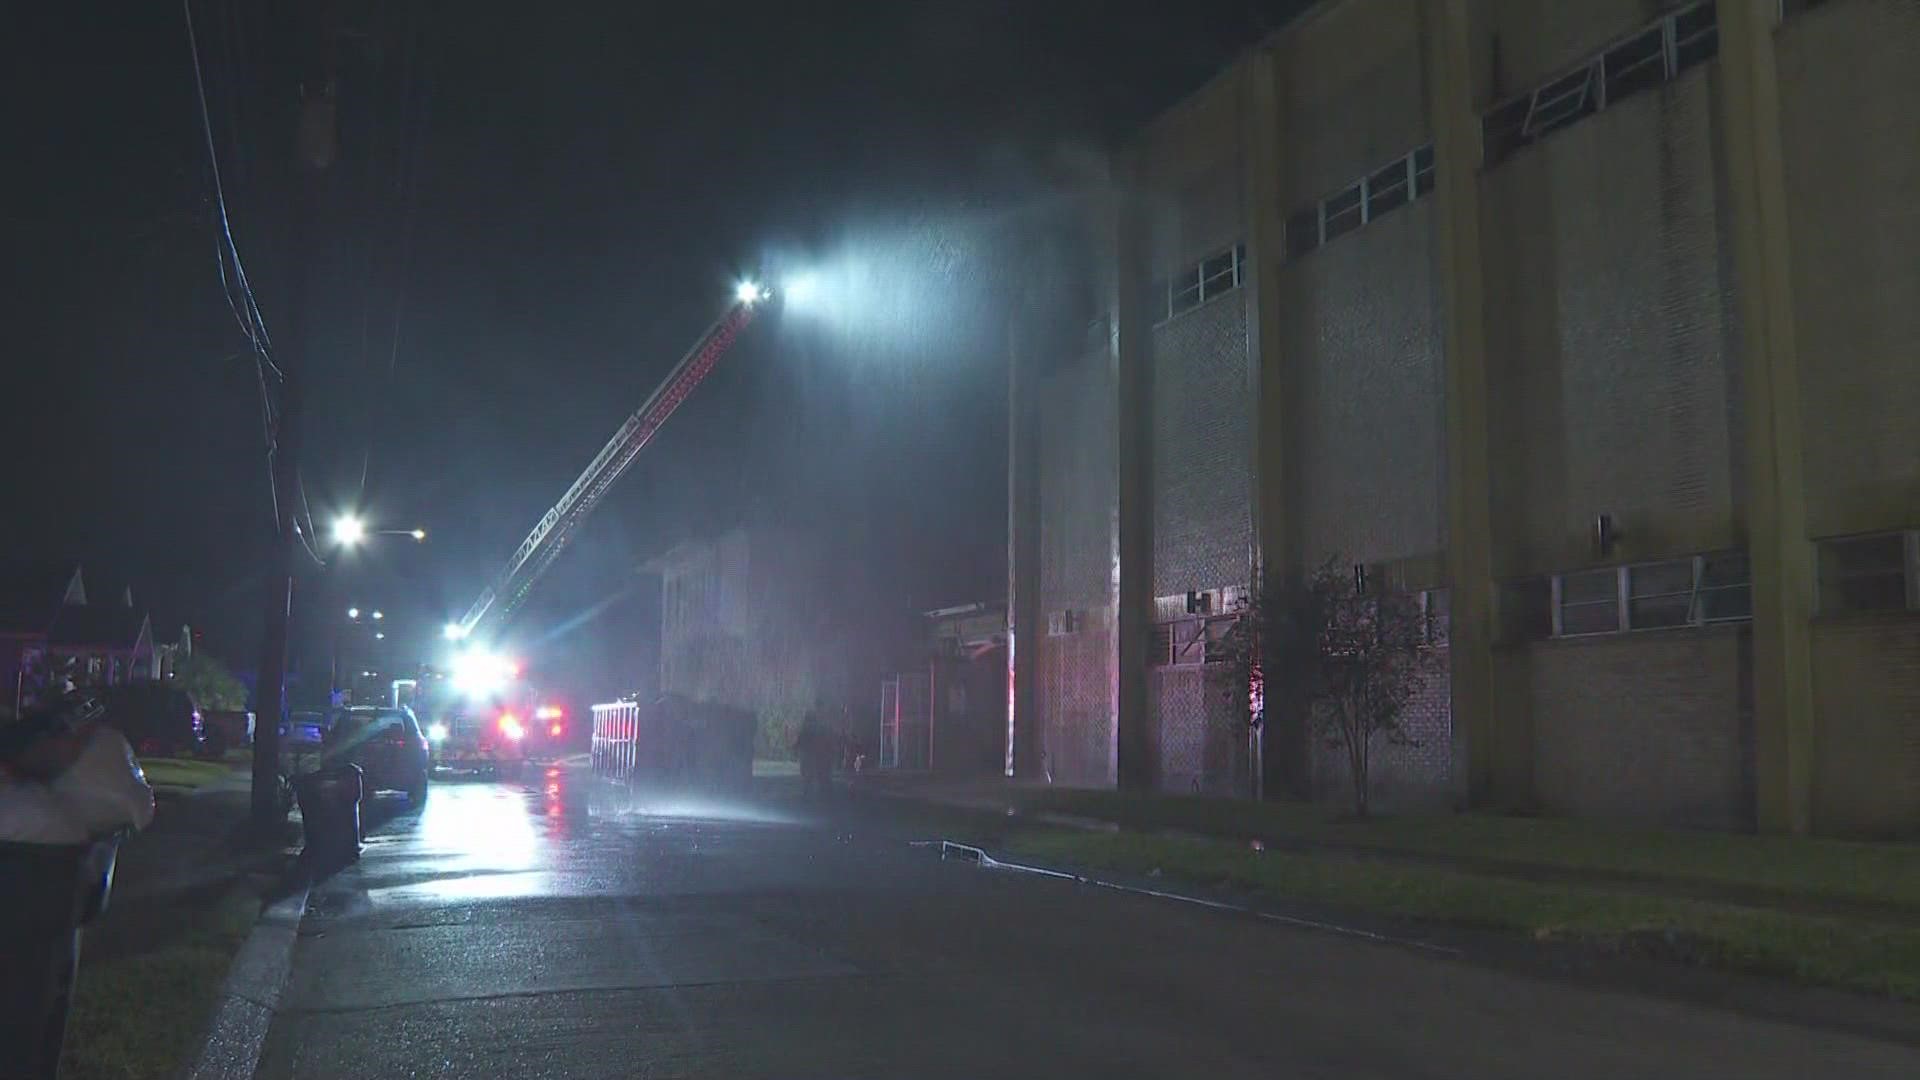 A fire broke out at historic St. Augustine High School. NOFD PIO said there was no one inside at the time but is unsure of the cause.